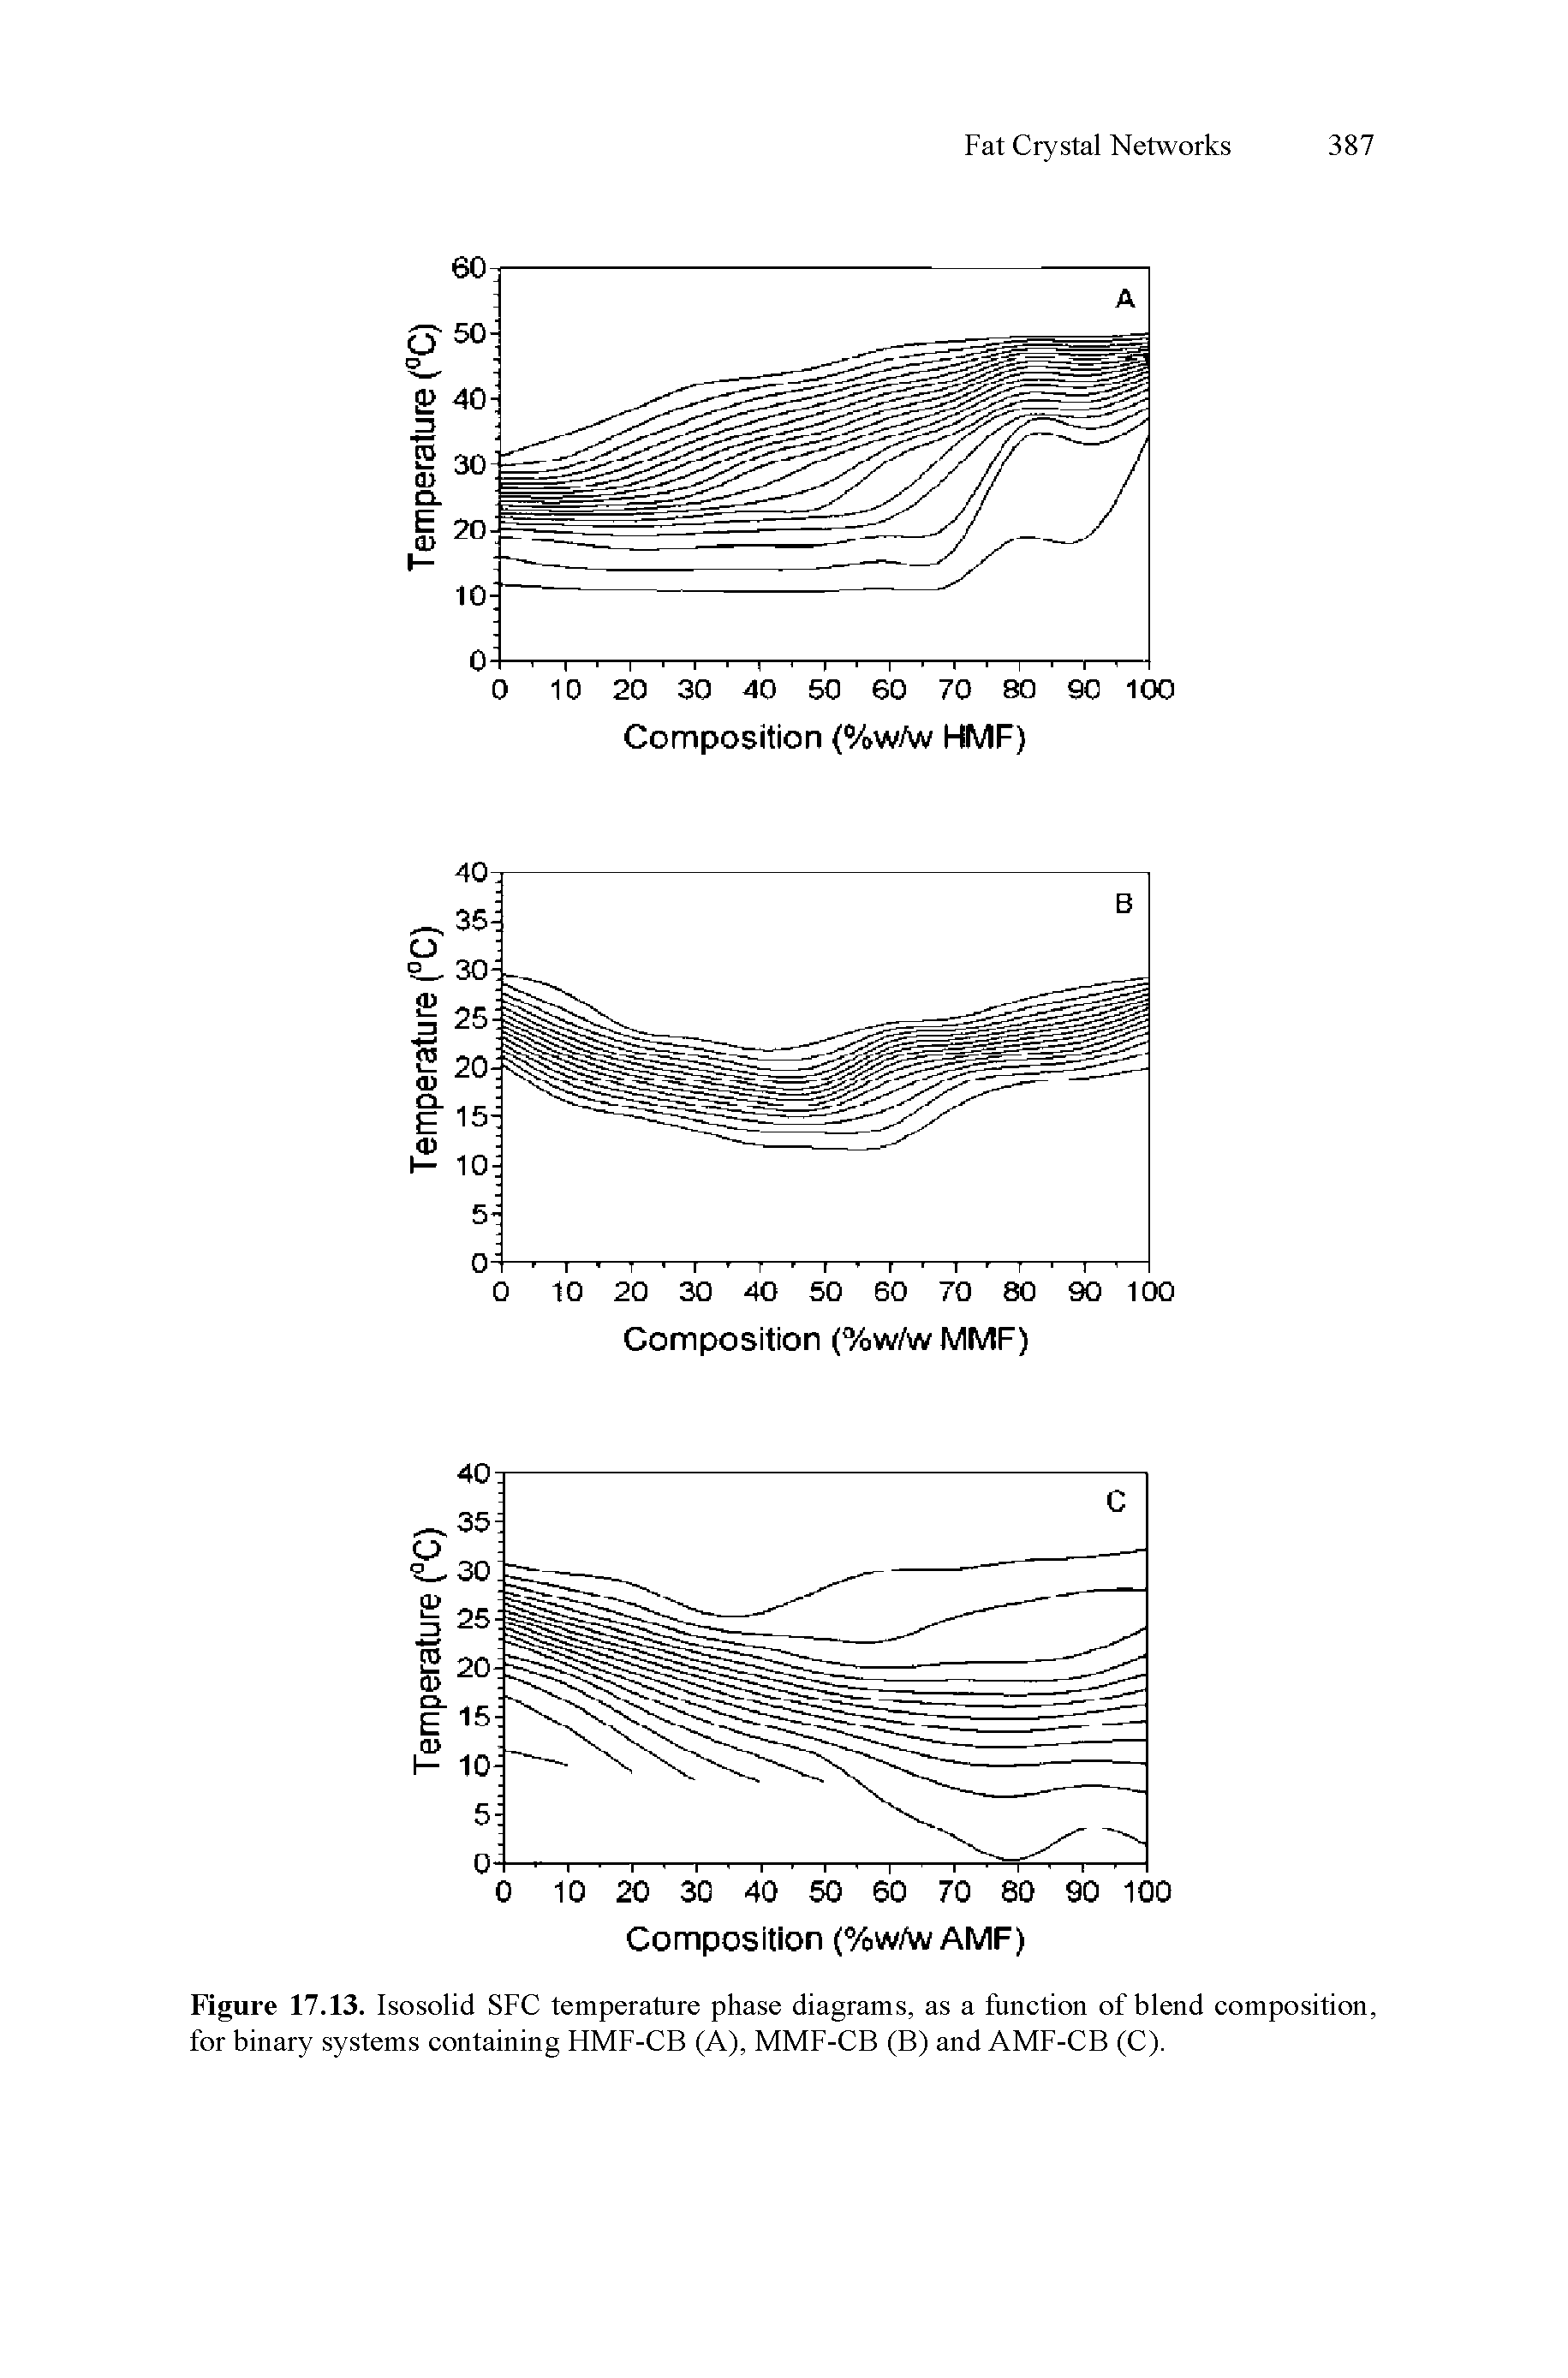 Figure 17.13. Isosolid SFC temperature phase diagrams, as a funetion of blend eomposition, for binary systems eontaining FIMF-CB (A), MMF-CB (B) and AMF-CB (C).